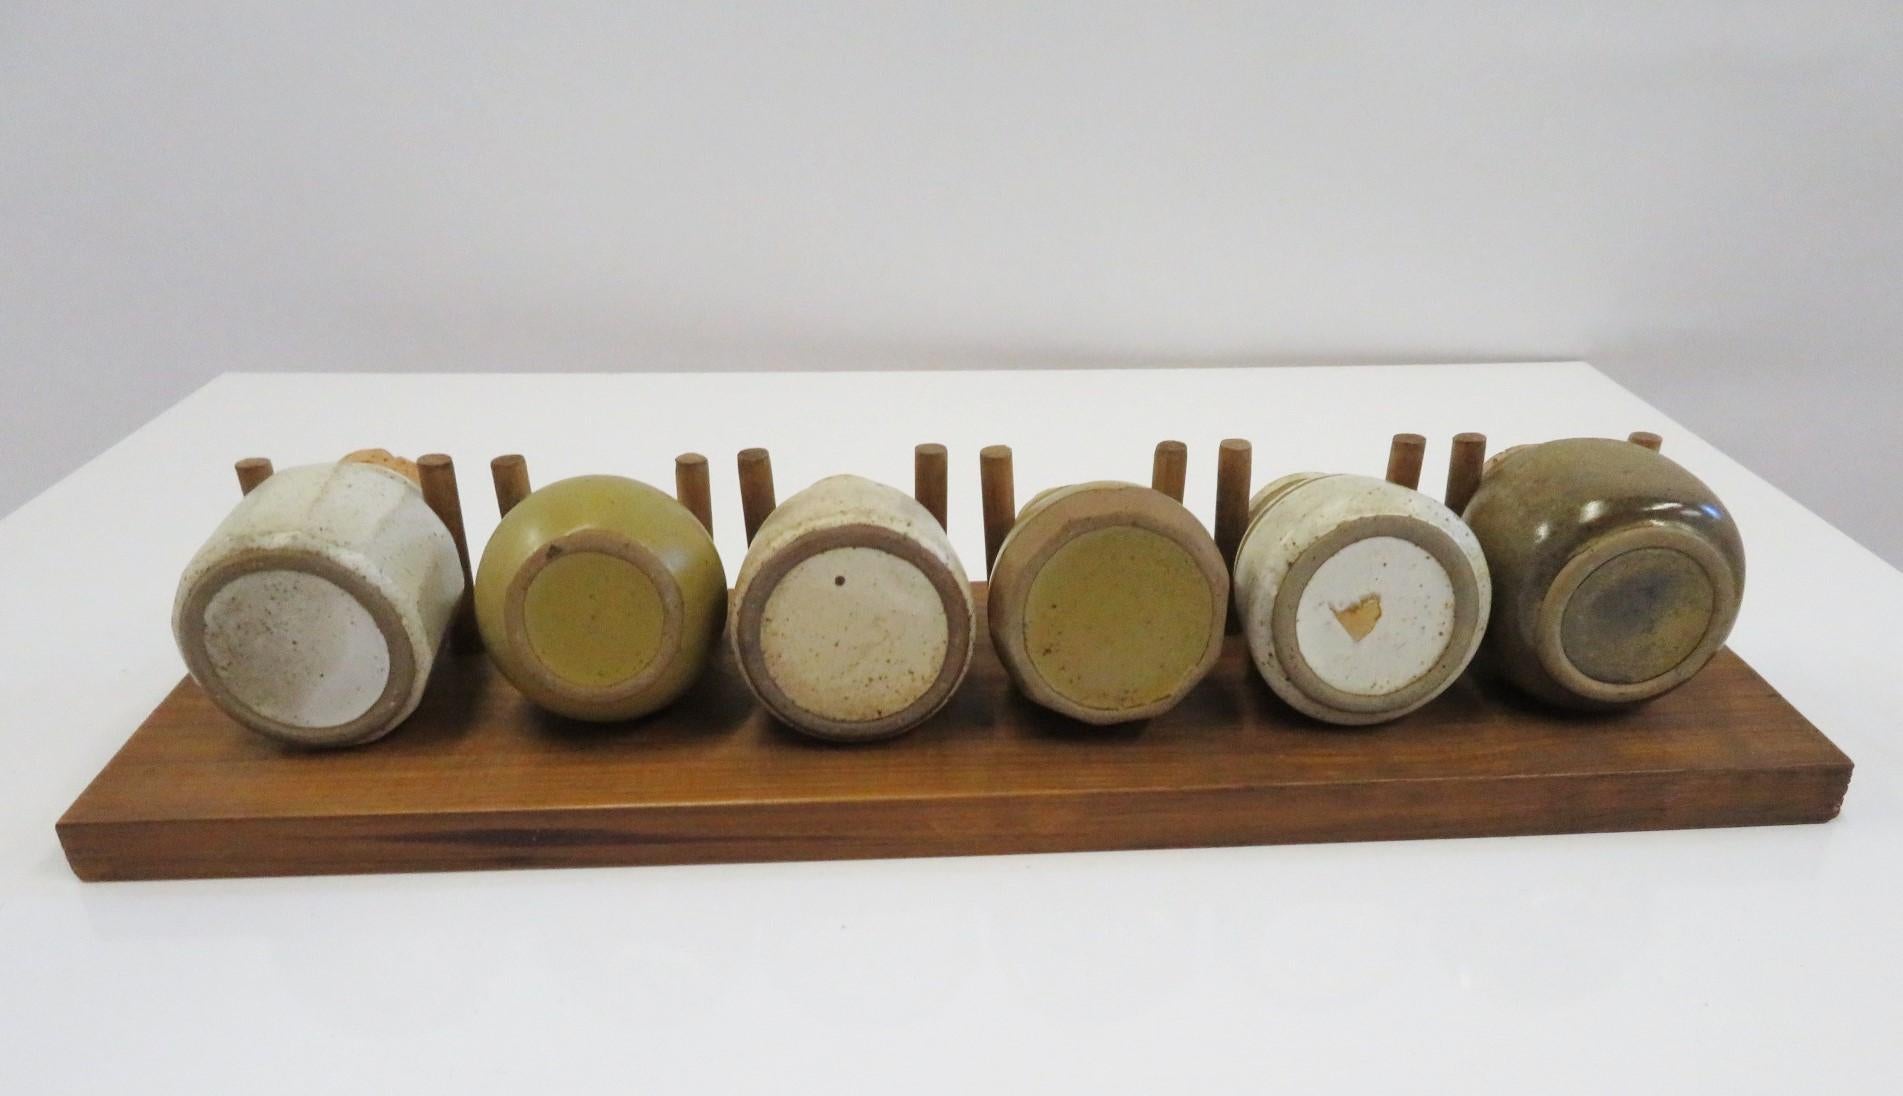 Late 20th Century 1970s Organic Modern Kitchen Wall Spice Rack with Pottery Jars Cork Tops